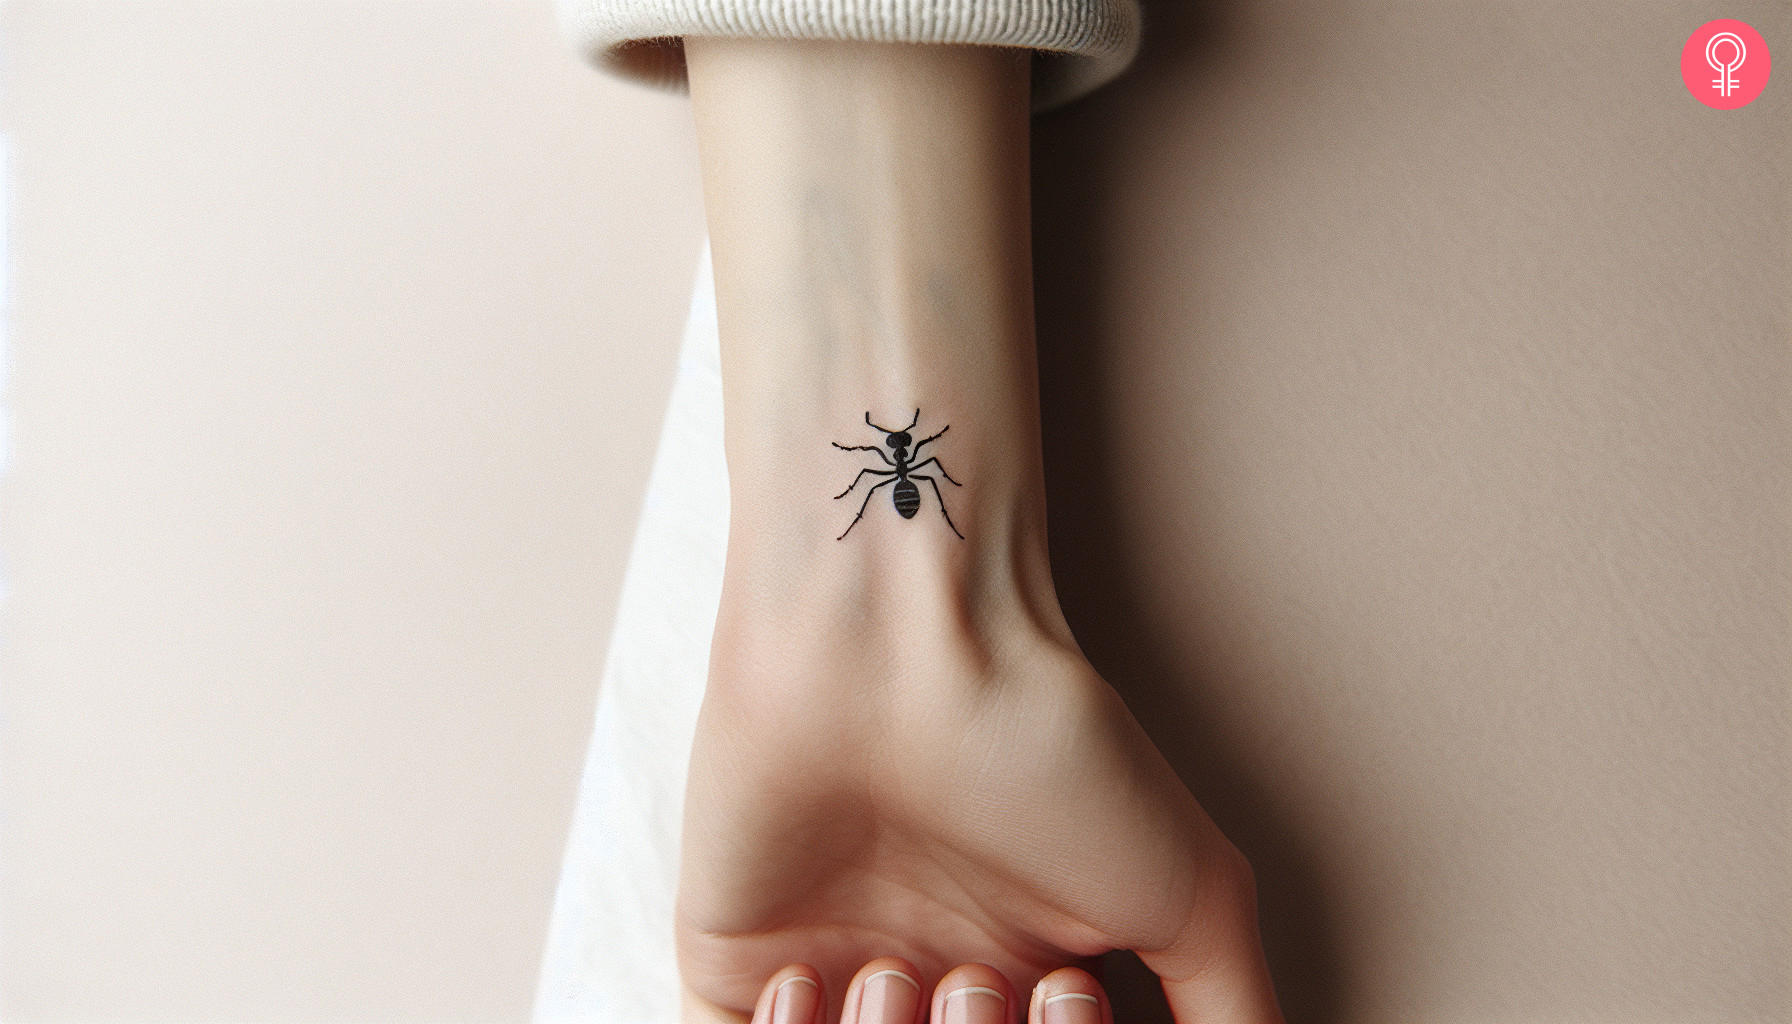 Small ant tattoo on the wrist